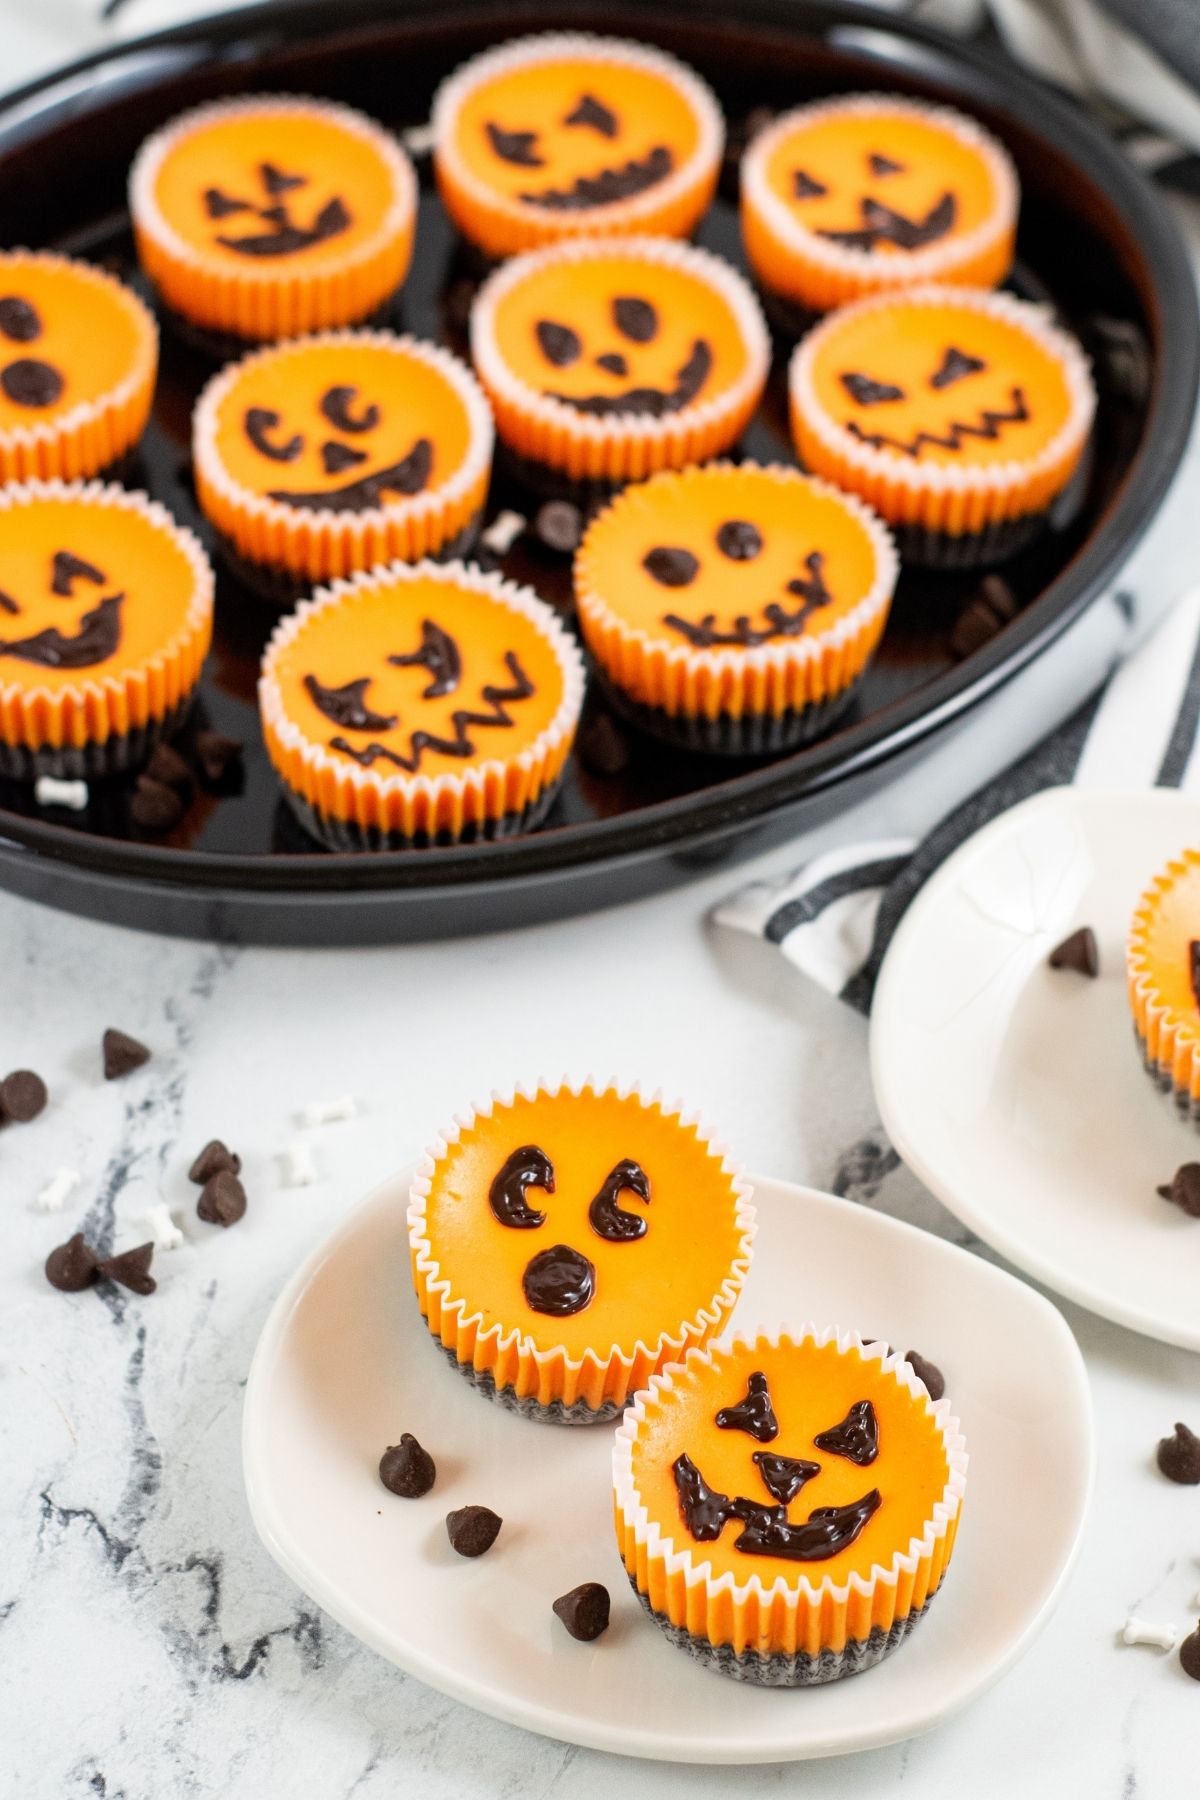 mini orange cheesecakes in cupcake liners with chocolate jack-o-lantern faces